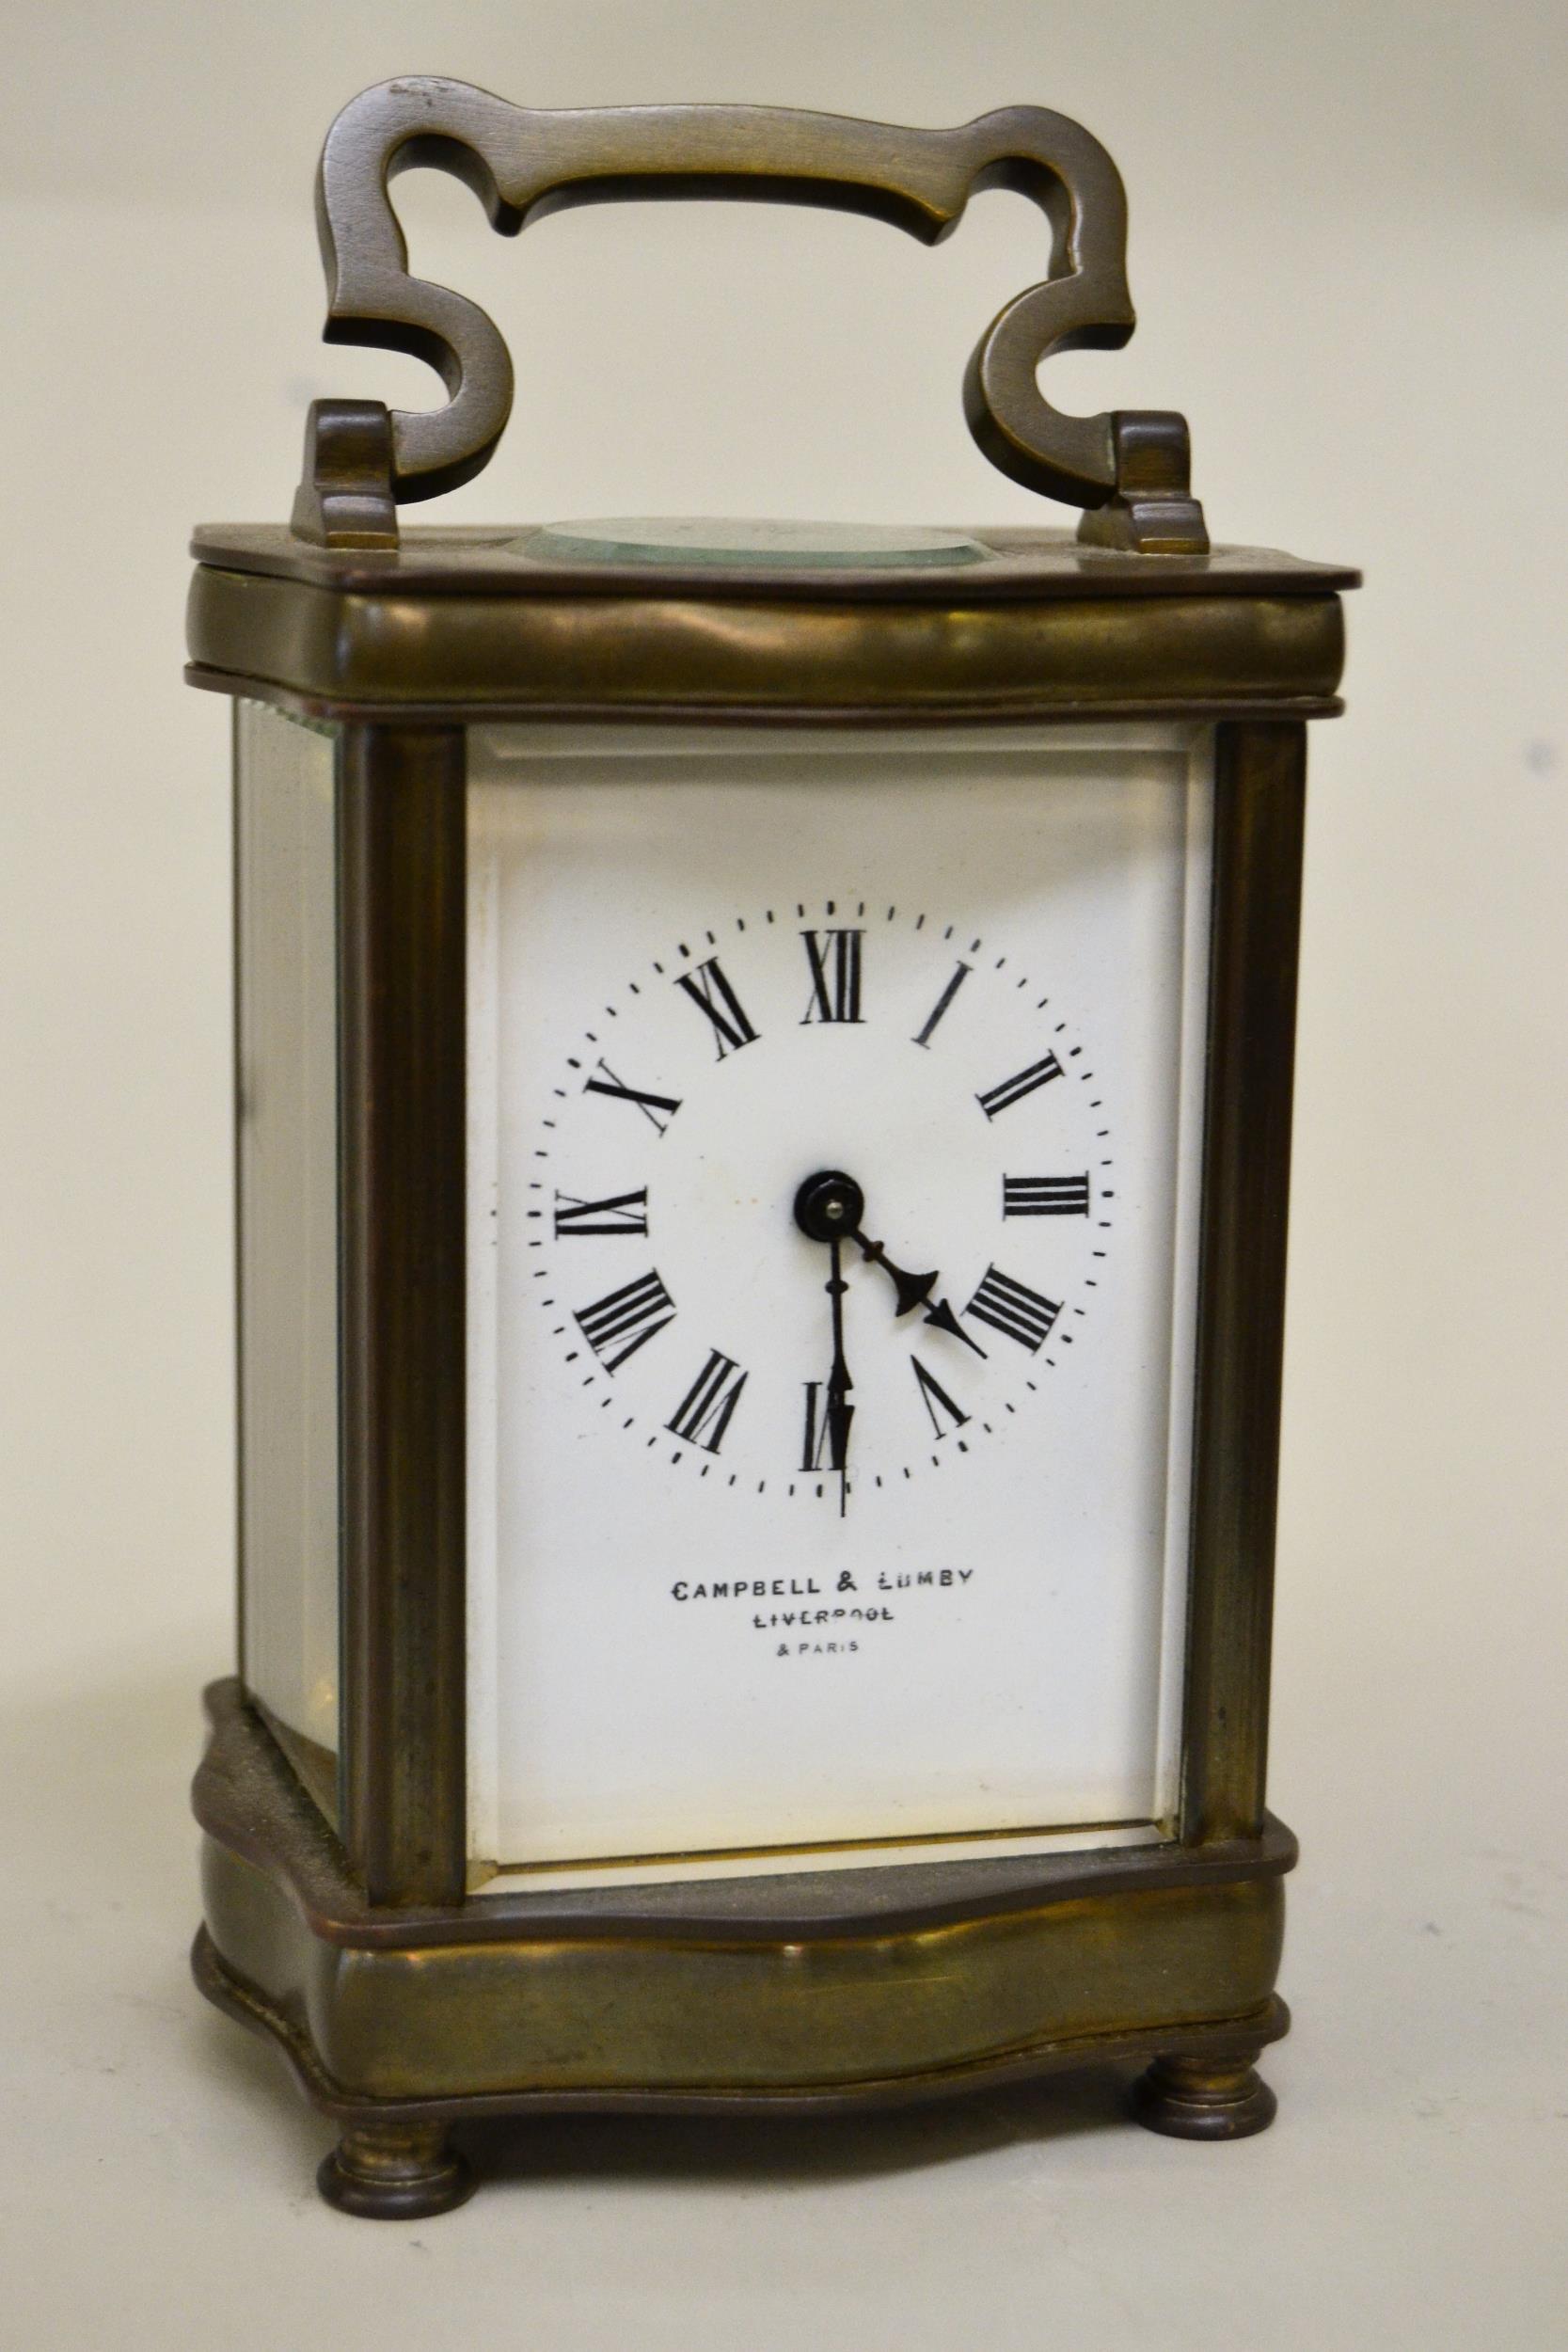 Small brass cased carriage clock, the enamel dial with Roman numerals, signed Campbell & Lumby,